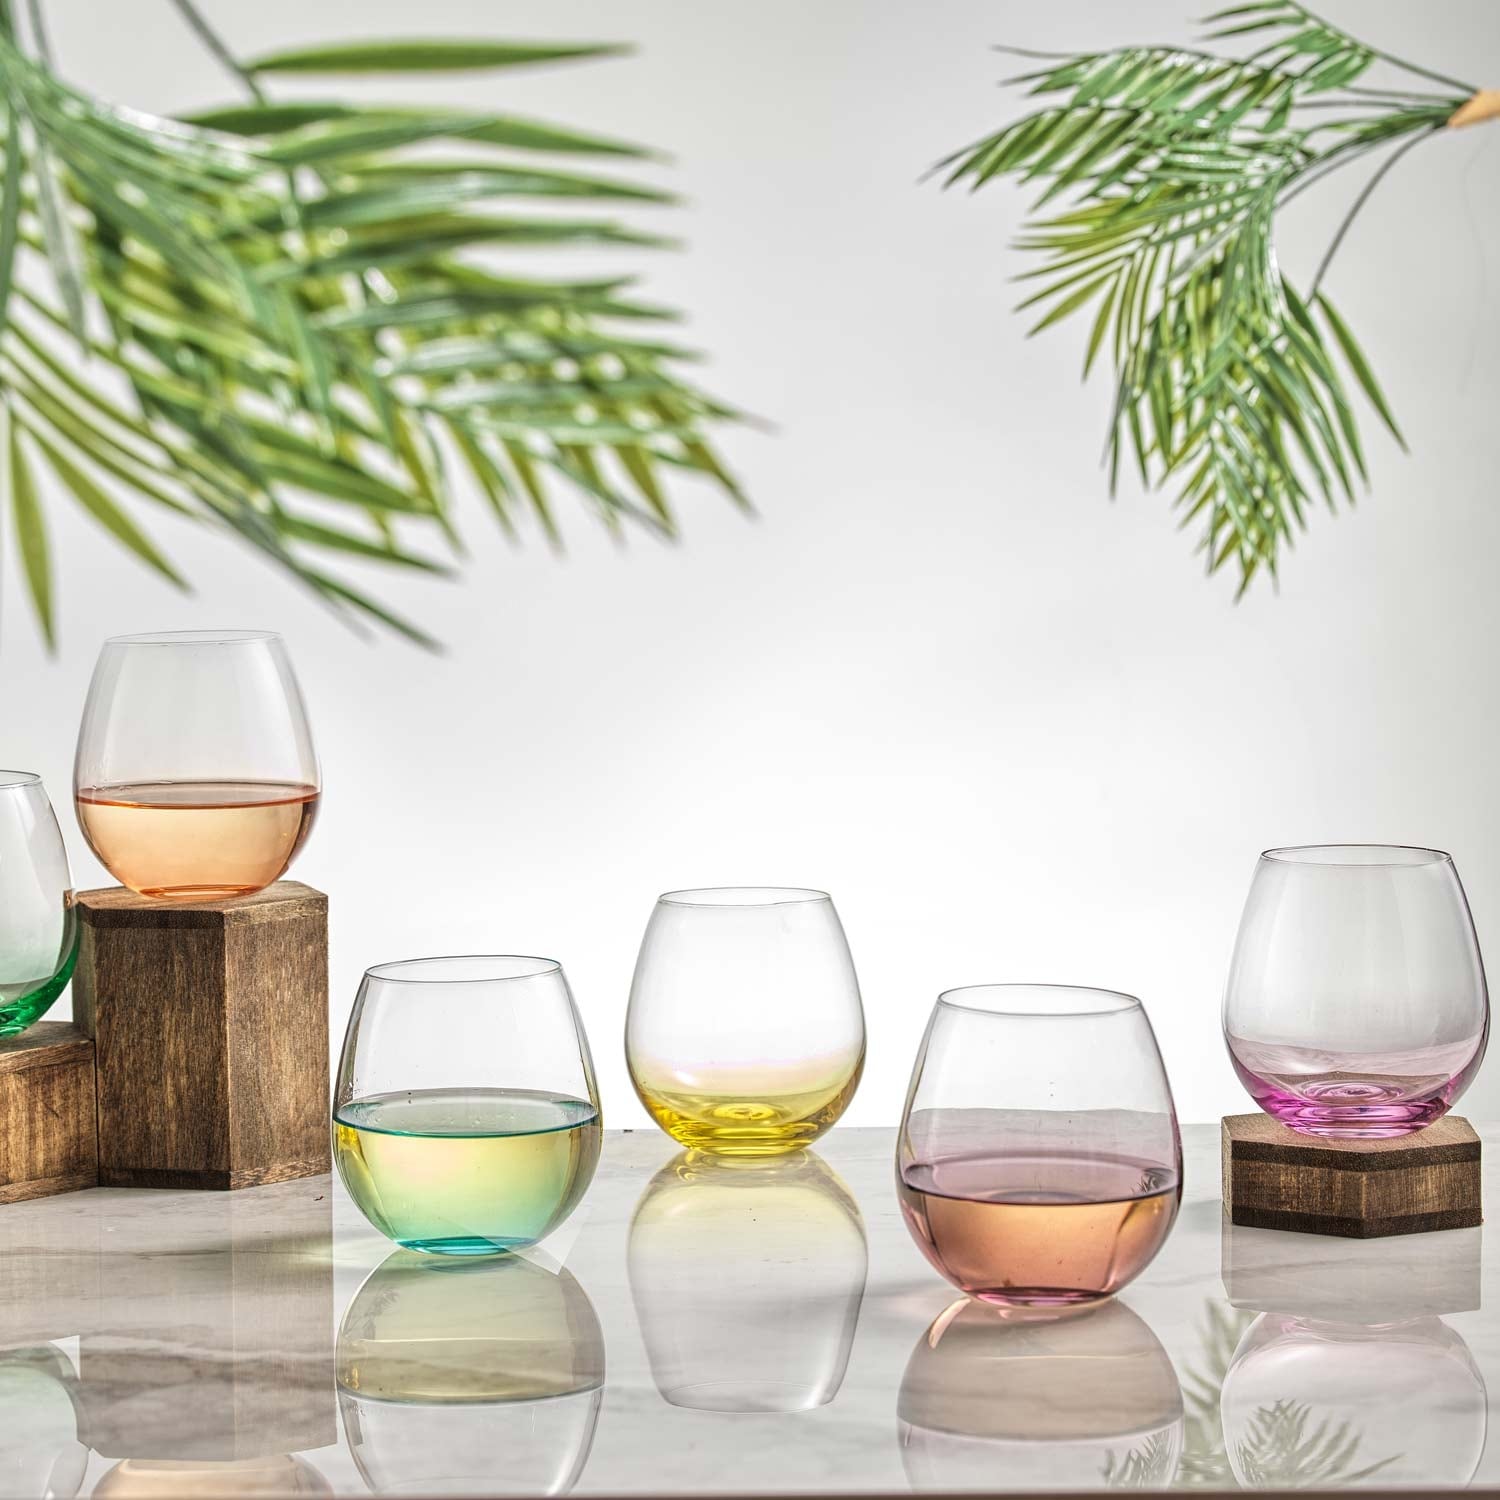 https://ak1.ostkcdn.com/images/products/is/images/direct/d010269fe1f9e0f5a00f0fa923bf51edd23b56b4/JoyJolt-Hue-Colored-Stemless-Wine-Glasses---15-oz---Set-of-6.jpg